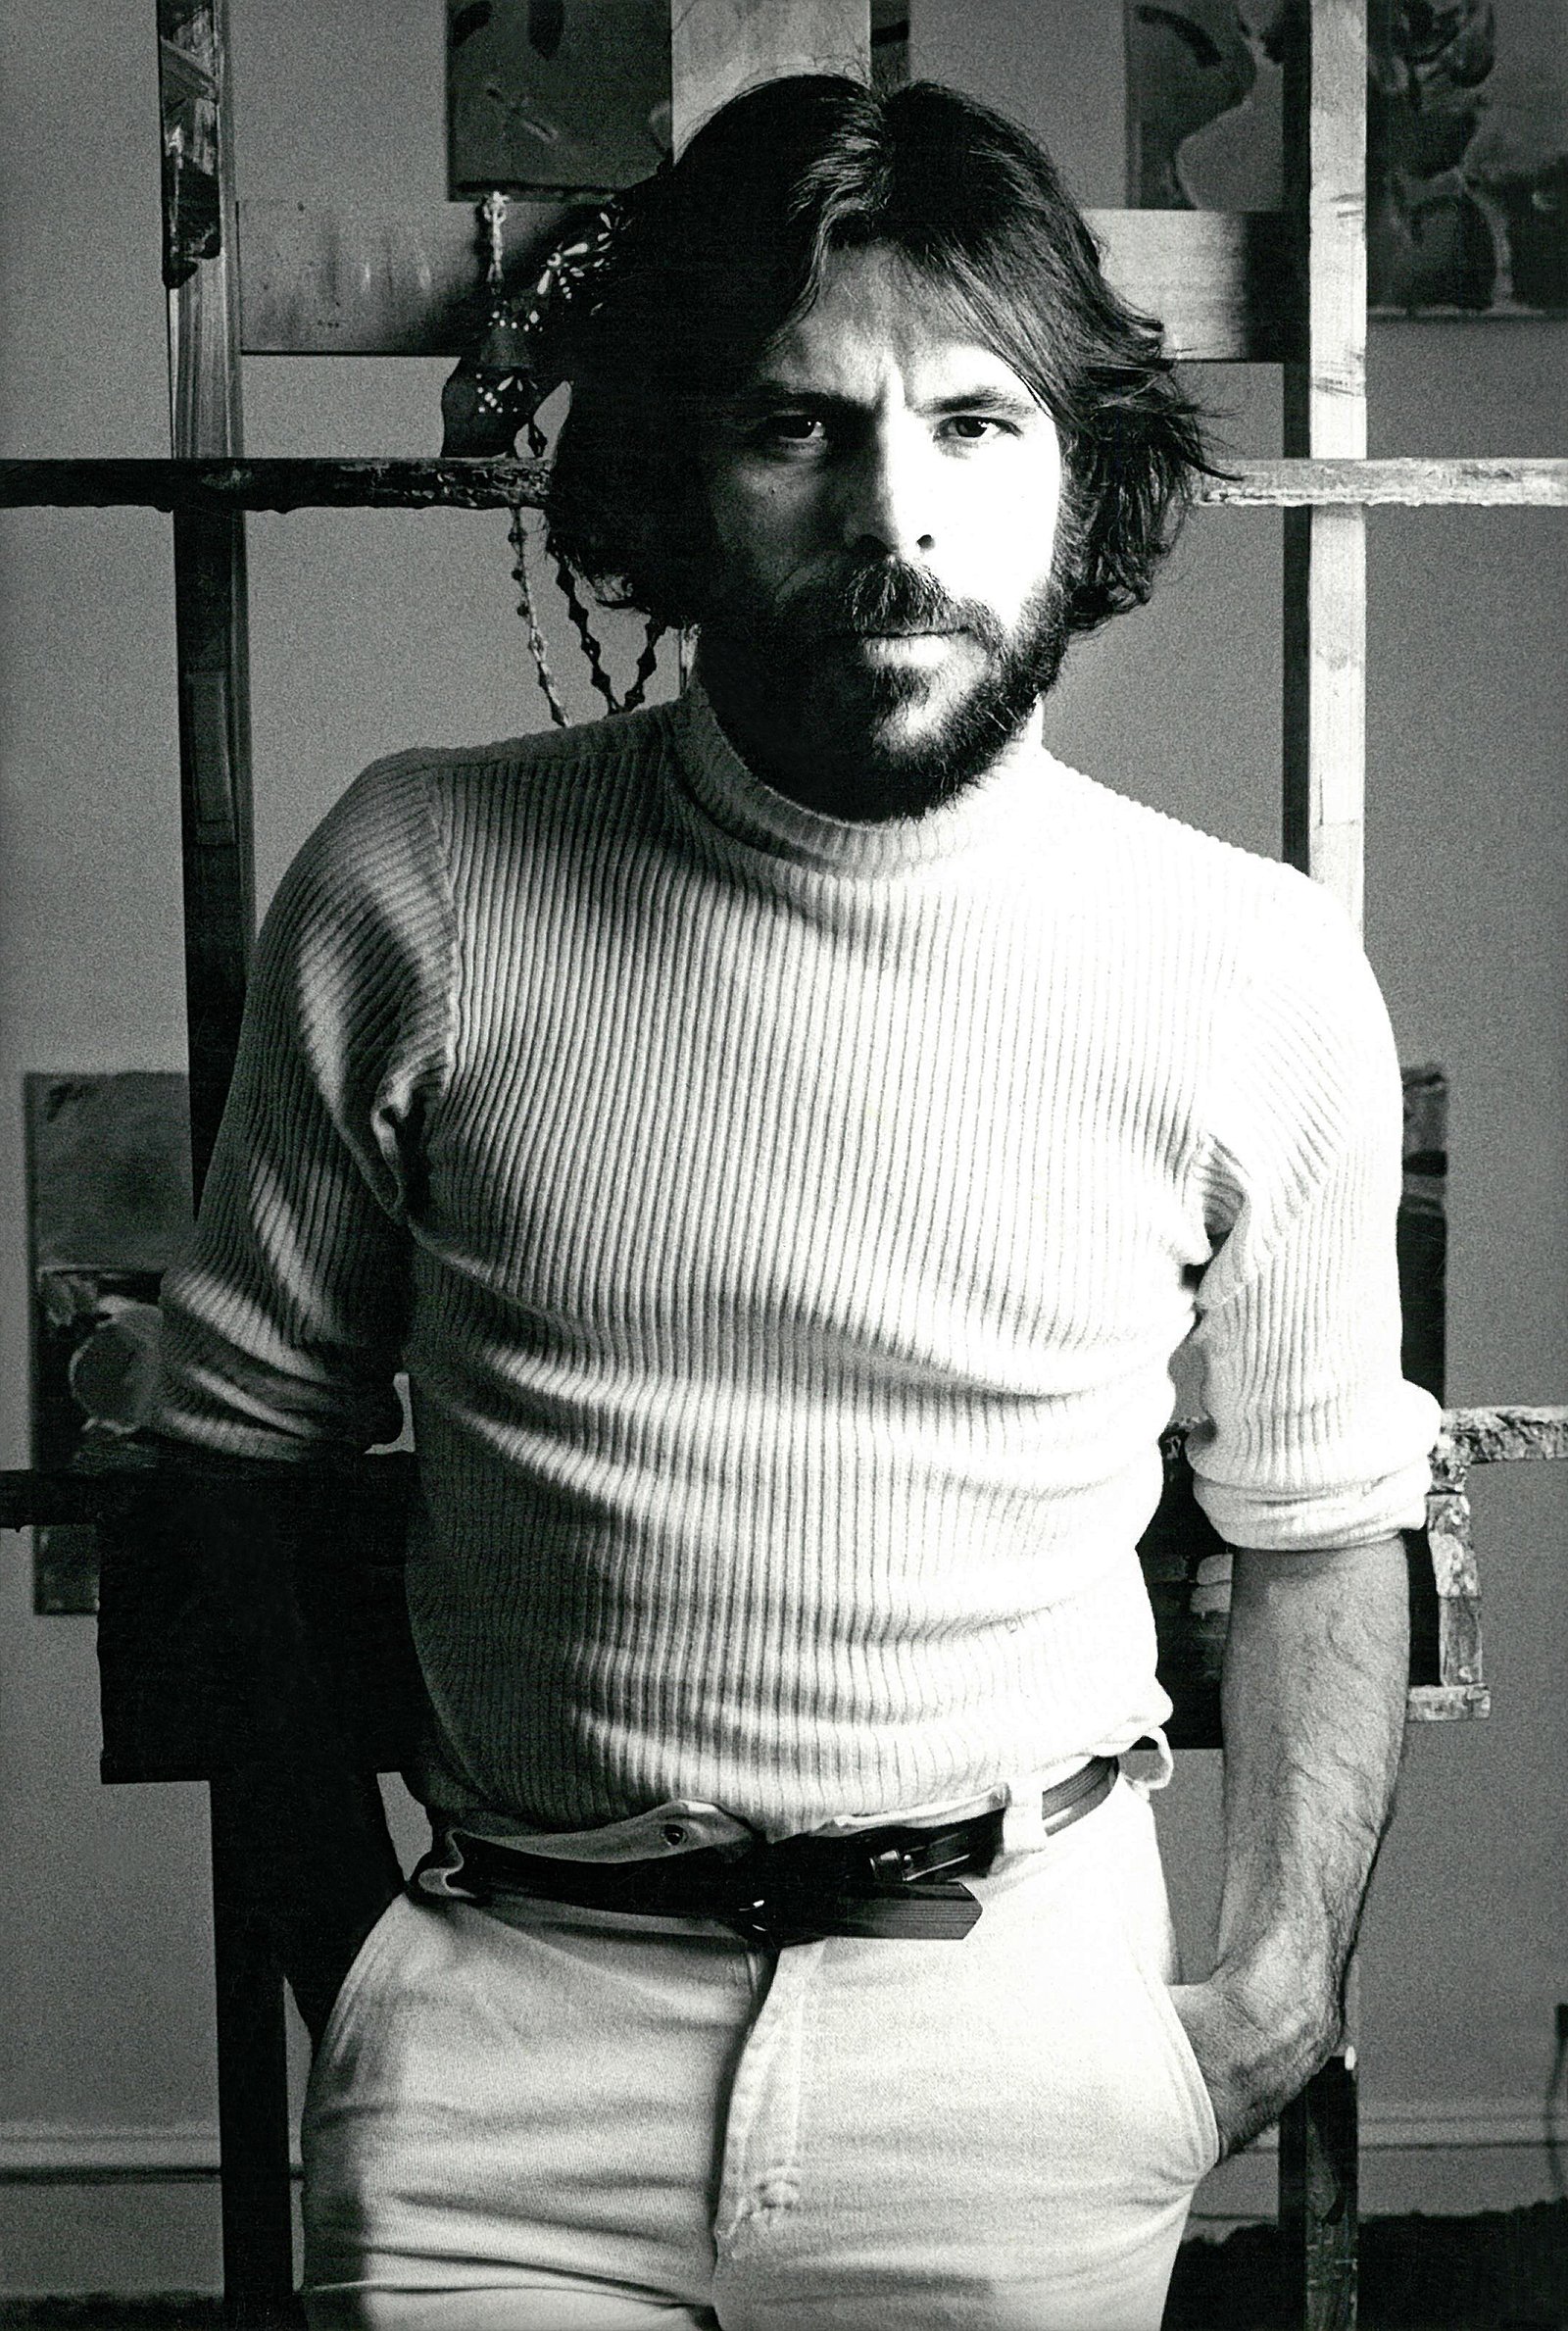 Moody black and white portrait of Peter Max